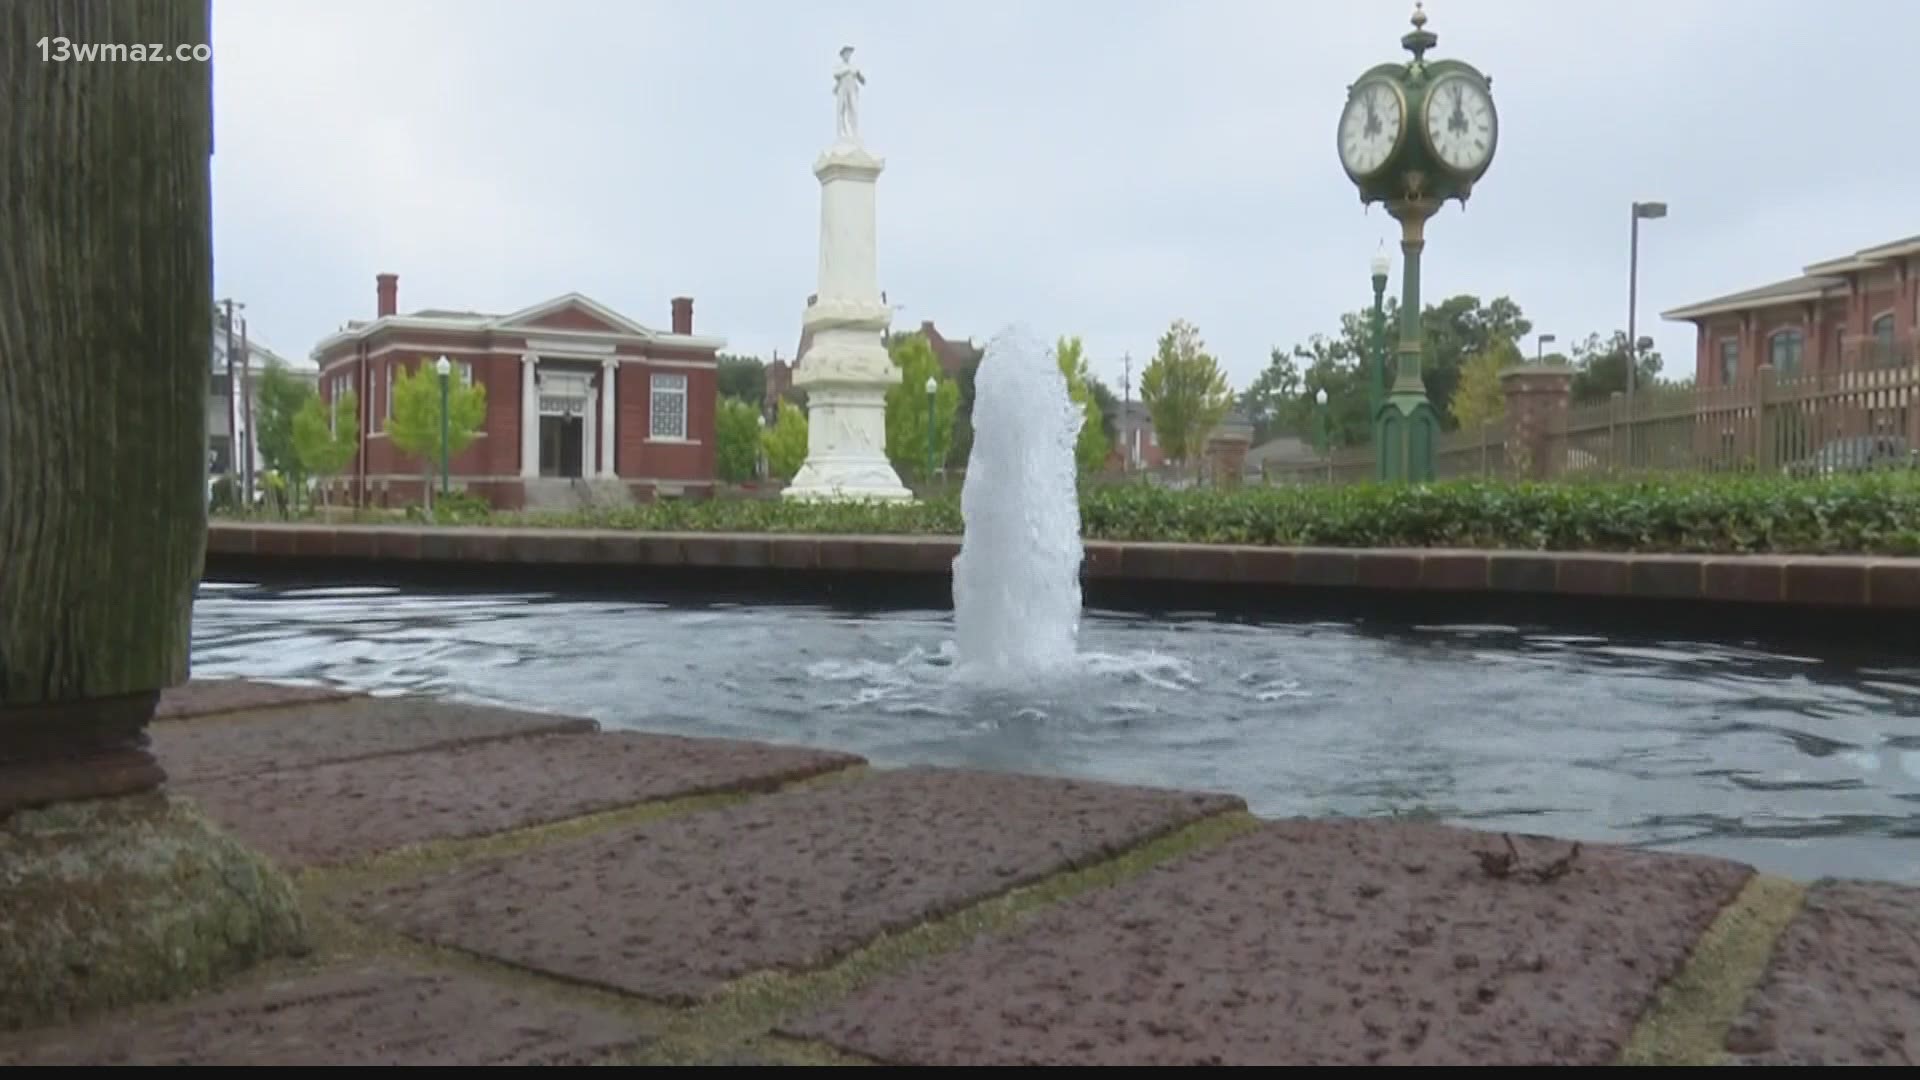 The City of Dublin is sharing what their new "unity park" would look like after some people in the community called for a Confederate monument to be taken down